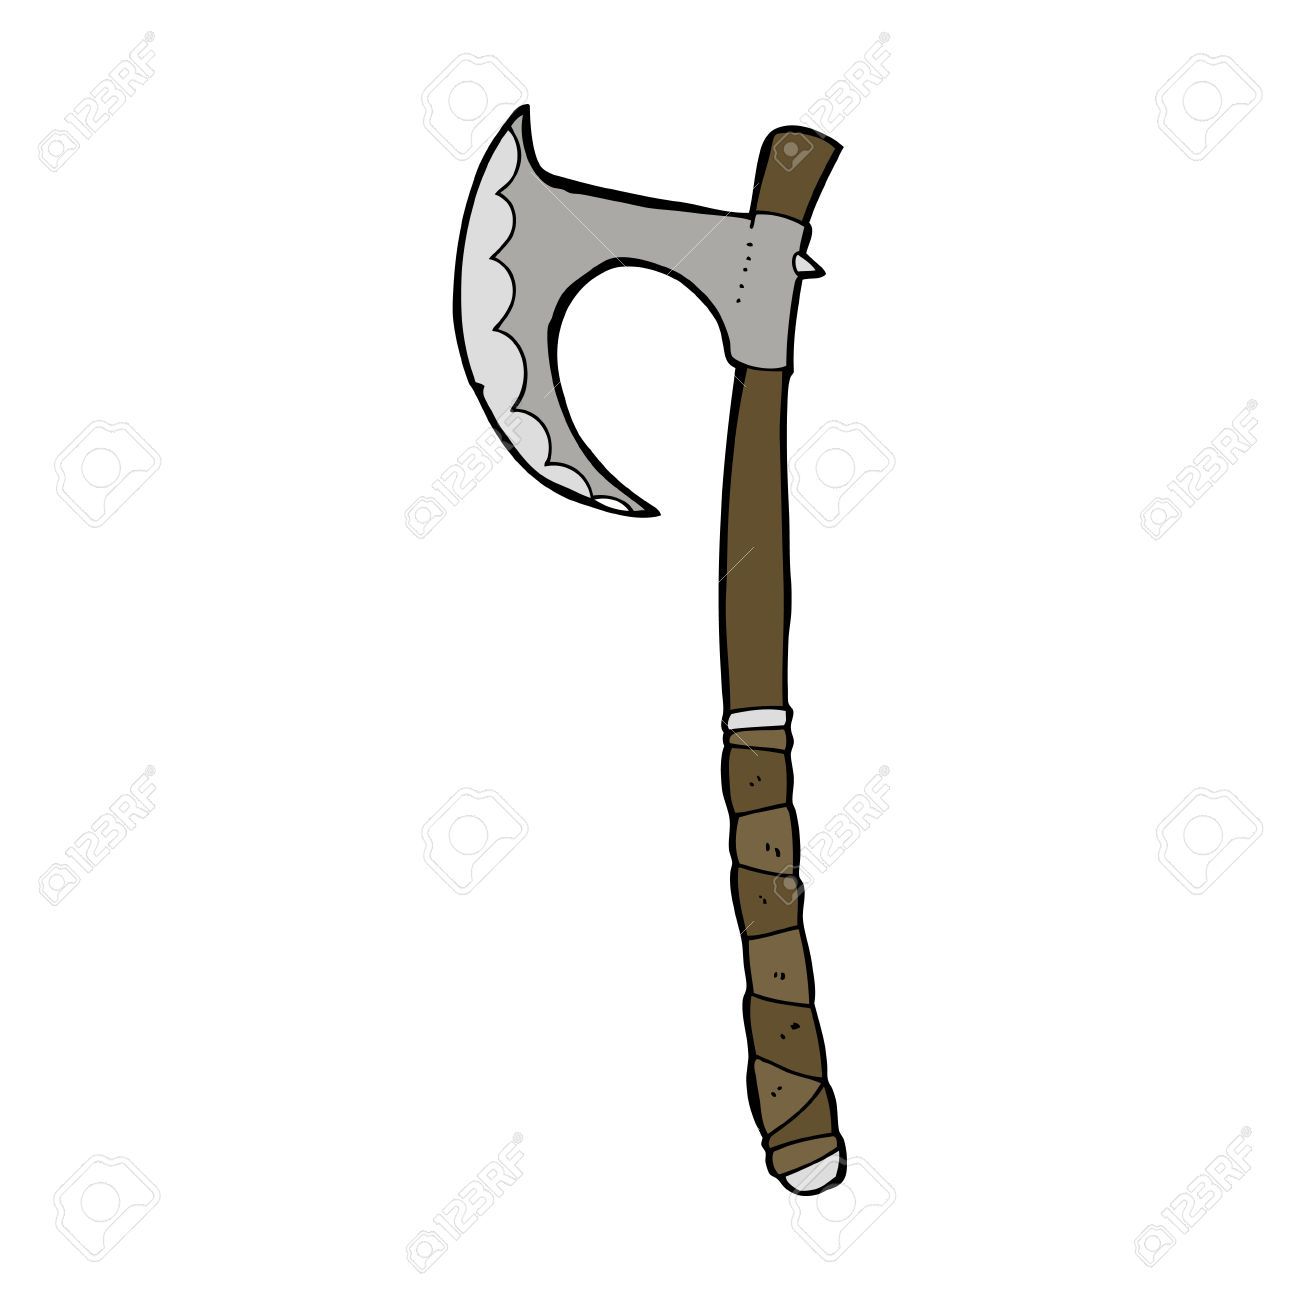 Axe cliparts free download. Ax clipart viking